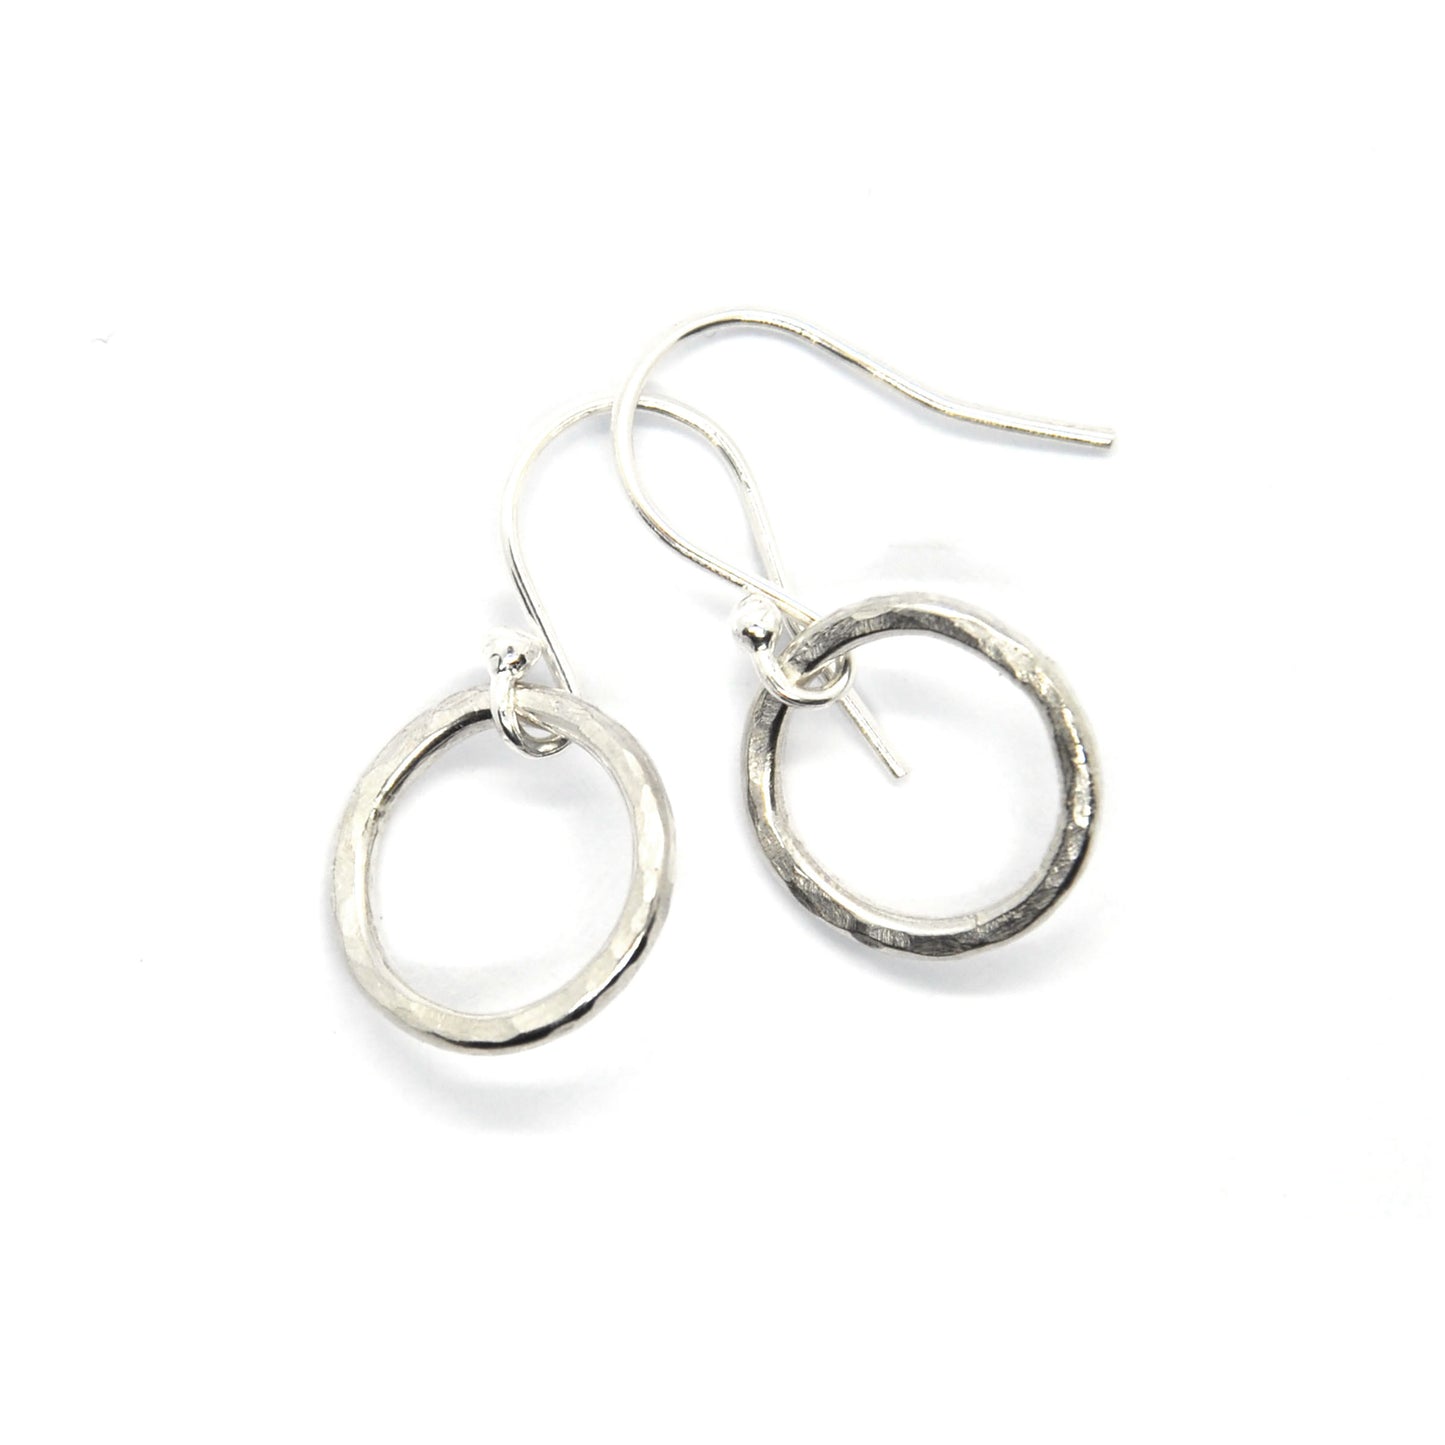 Sterling silver open circle drop earrings with hammered finish - small